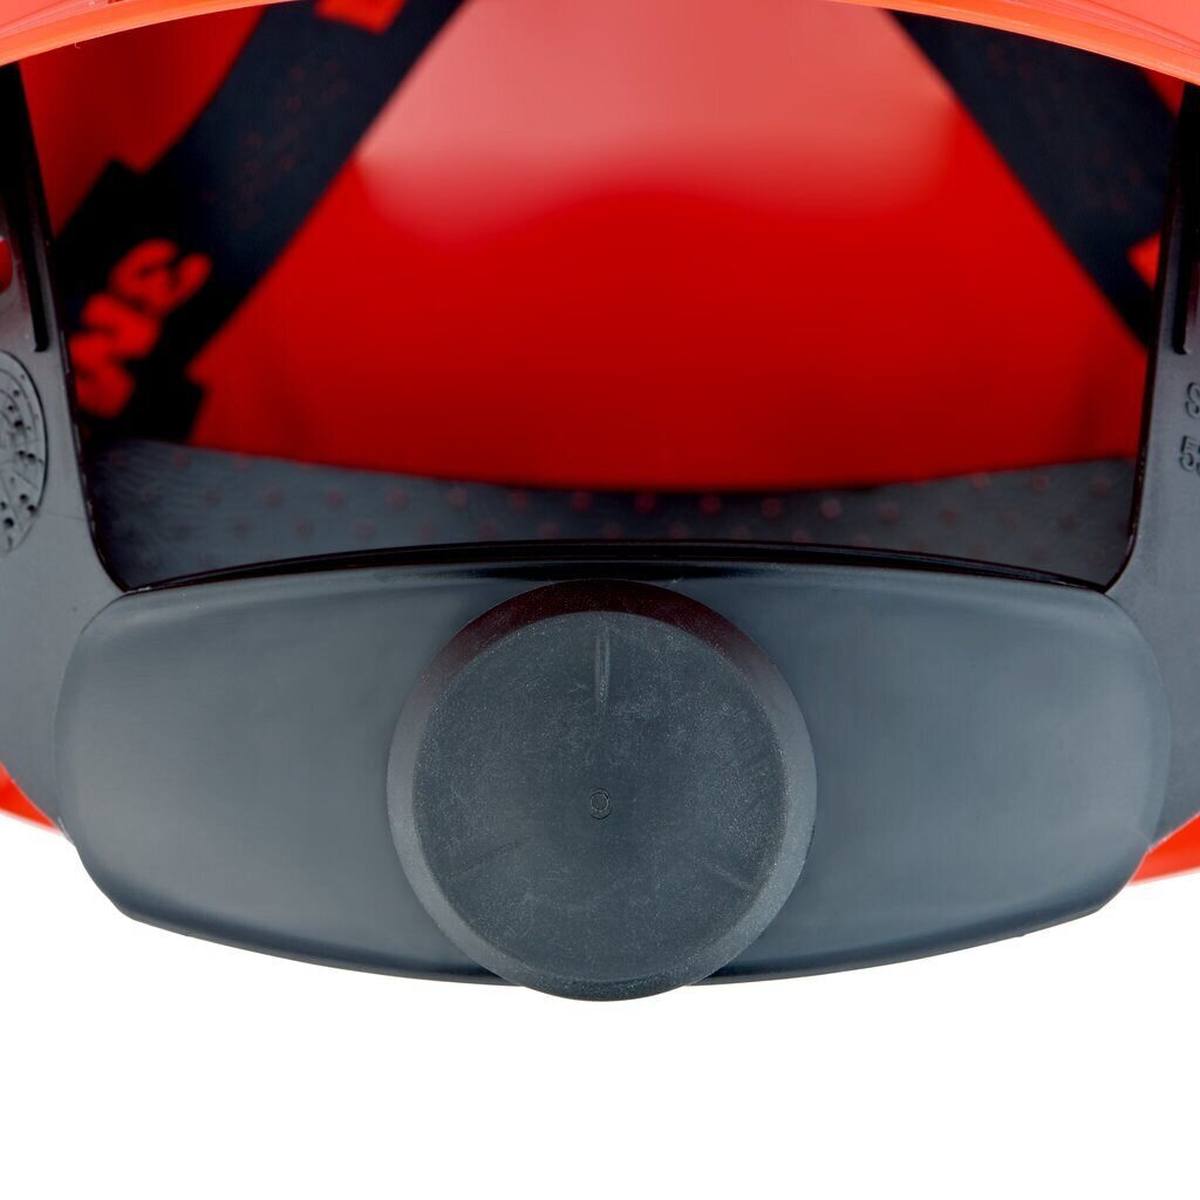 3M G3000 safety helmet with UV indicator, red, ABS, ventilated ratchet fastener, plastic sweatband, reflective sticker